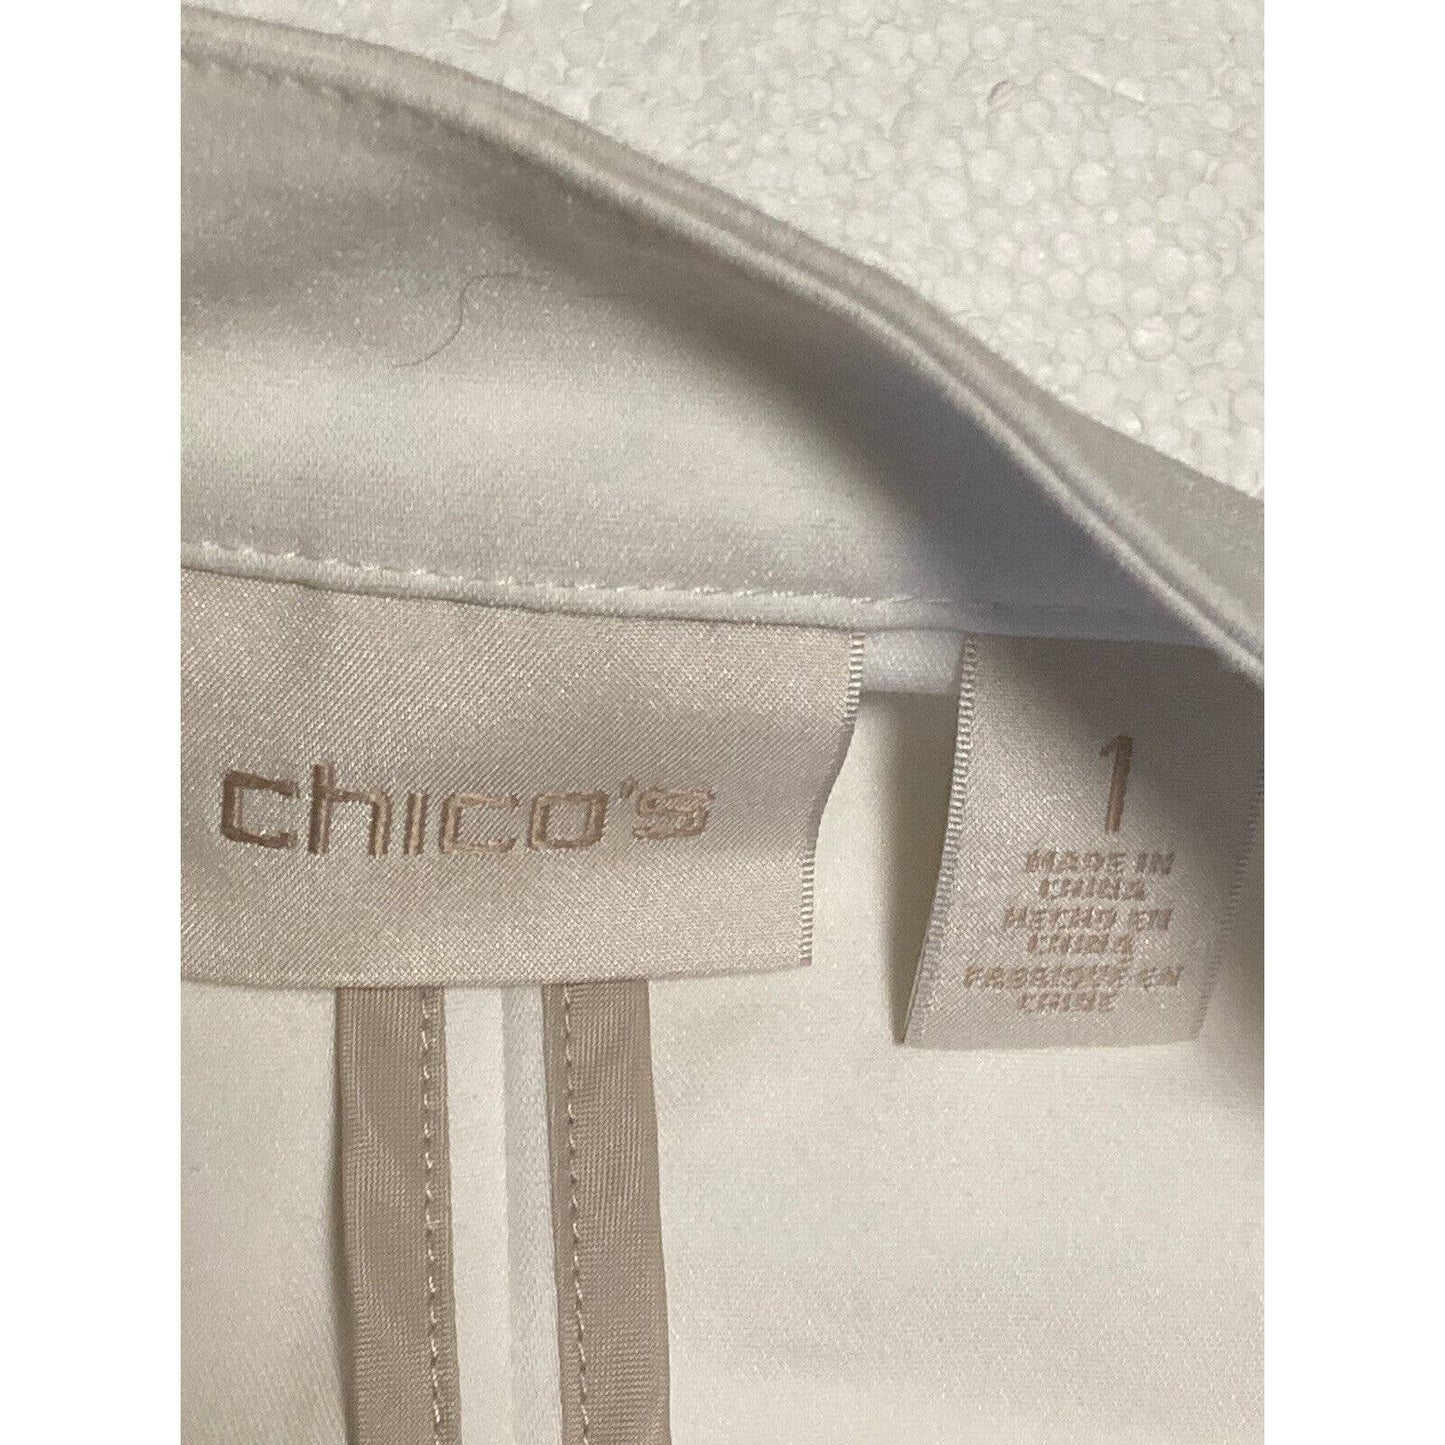 Chico’s City Chic Topper Jacket White Size 1 Faux Zippers City Chic Topper Jacket White Size 1 Faux Zippers